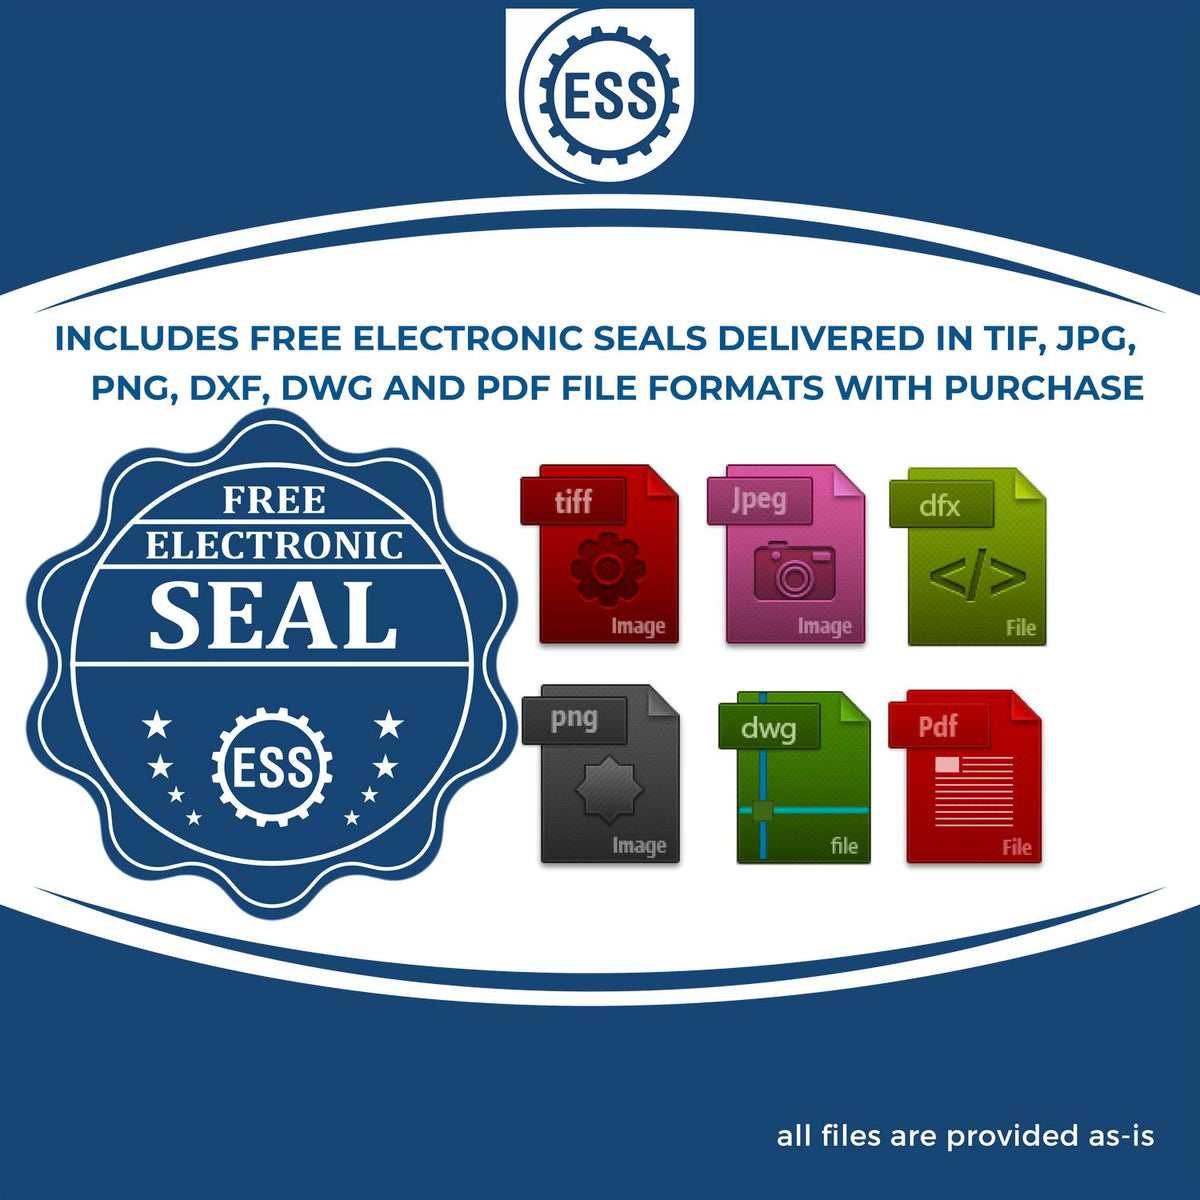 An infographic for the free electronic seal for the Premium MaxLight Pre-Inked Arkansas Geology Stamp illustrating the different file type icons such as DXF, DWG, TIF, JPG and PNG.